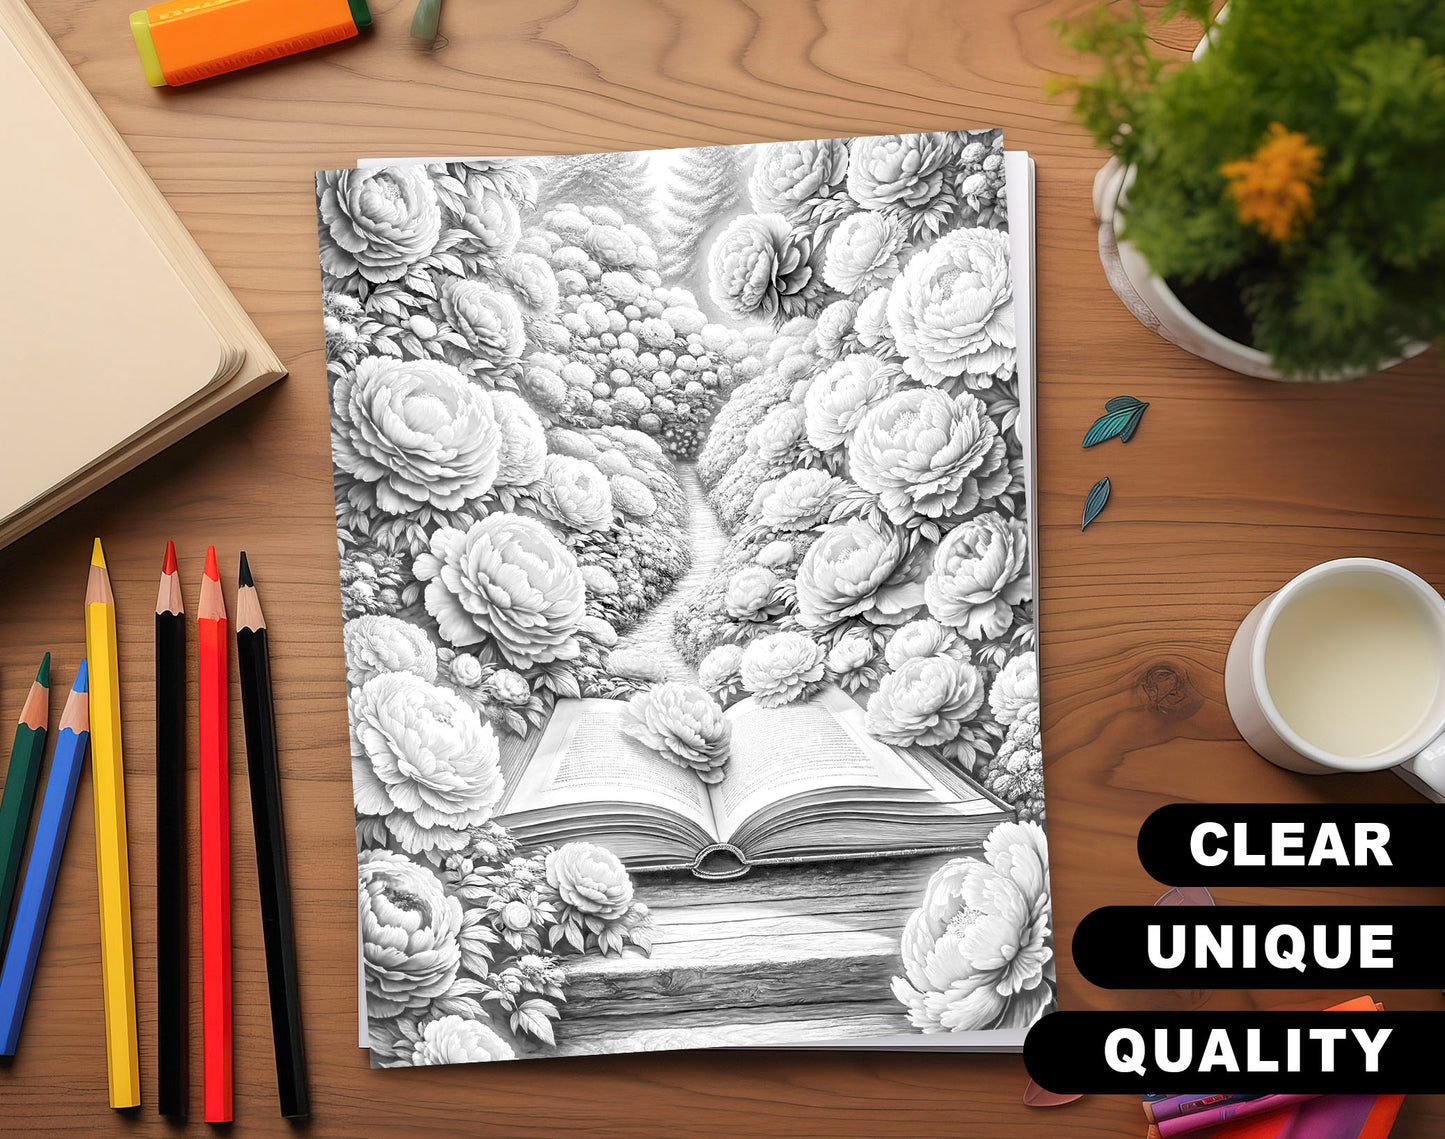 70 Open Magic Book - World of Flowers Grayscale Coloring Pages - Instant Download - Printable Dark/Light